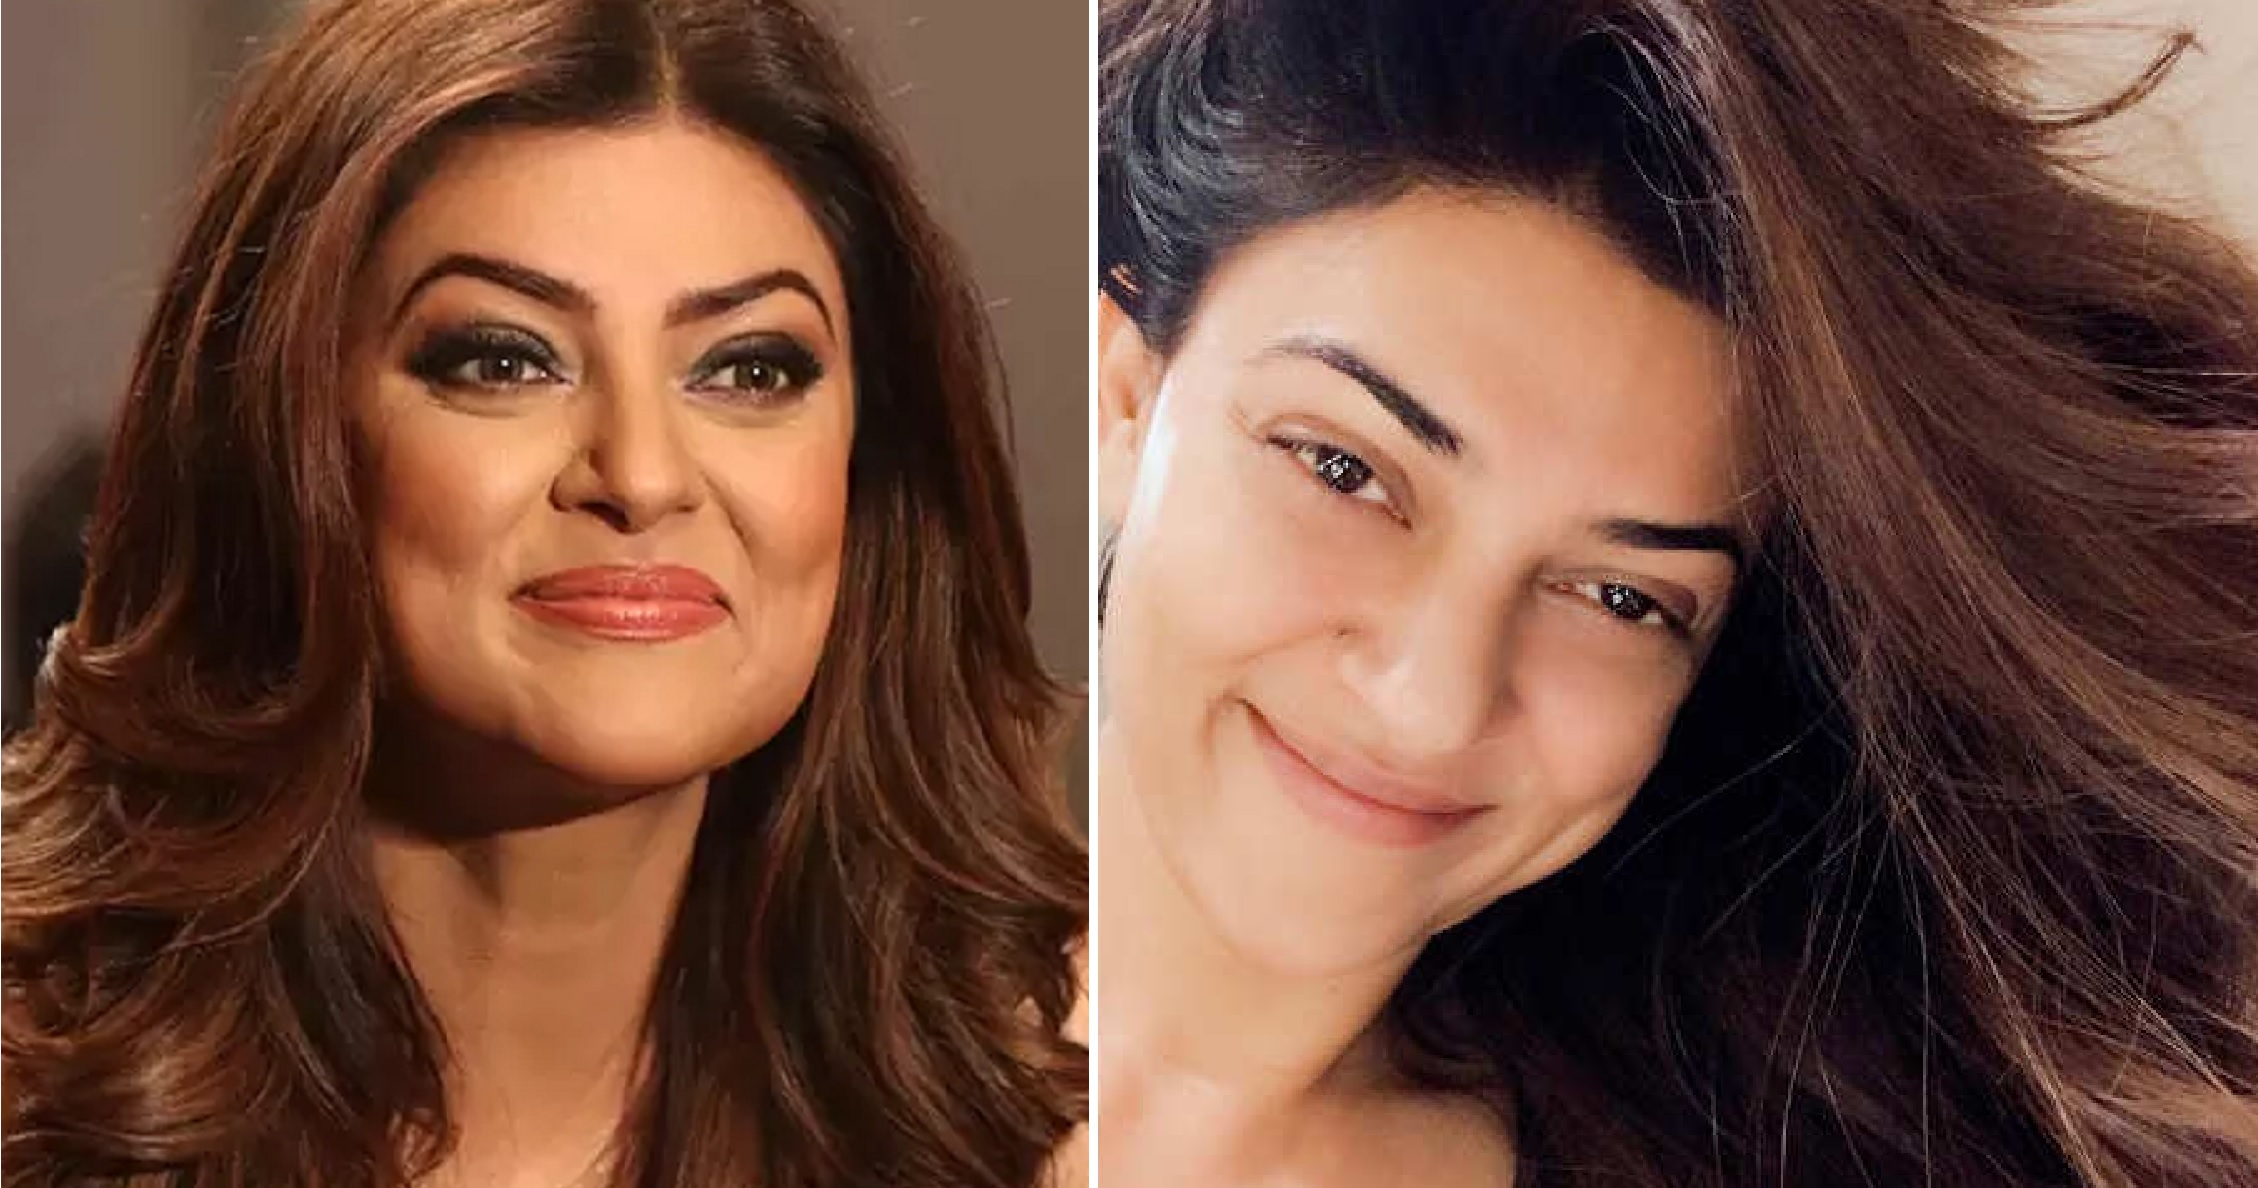 Sushmita Sen Reveals She Underwent A Surgery For Health-Reasons, “It’s Like Being Reborn This Birthday”